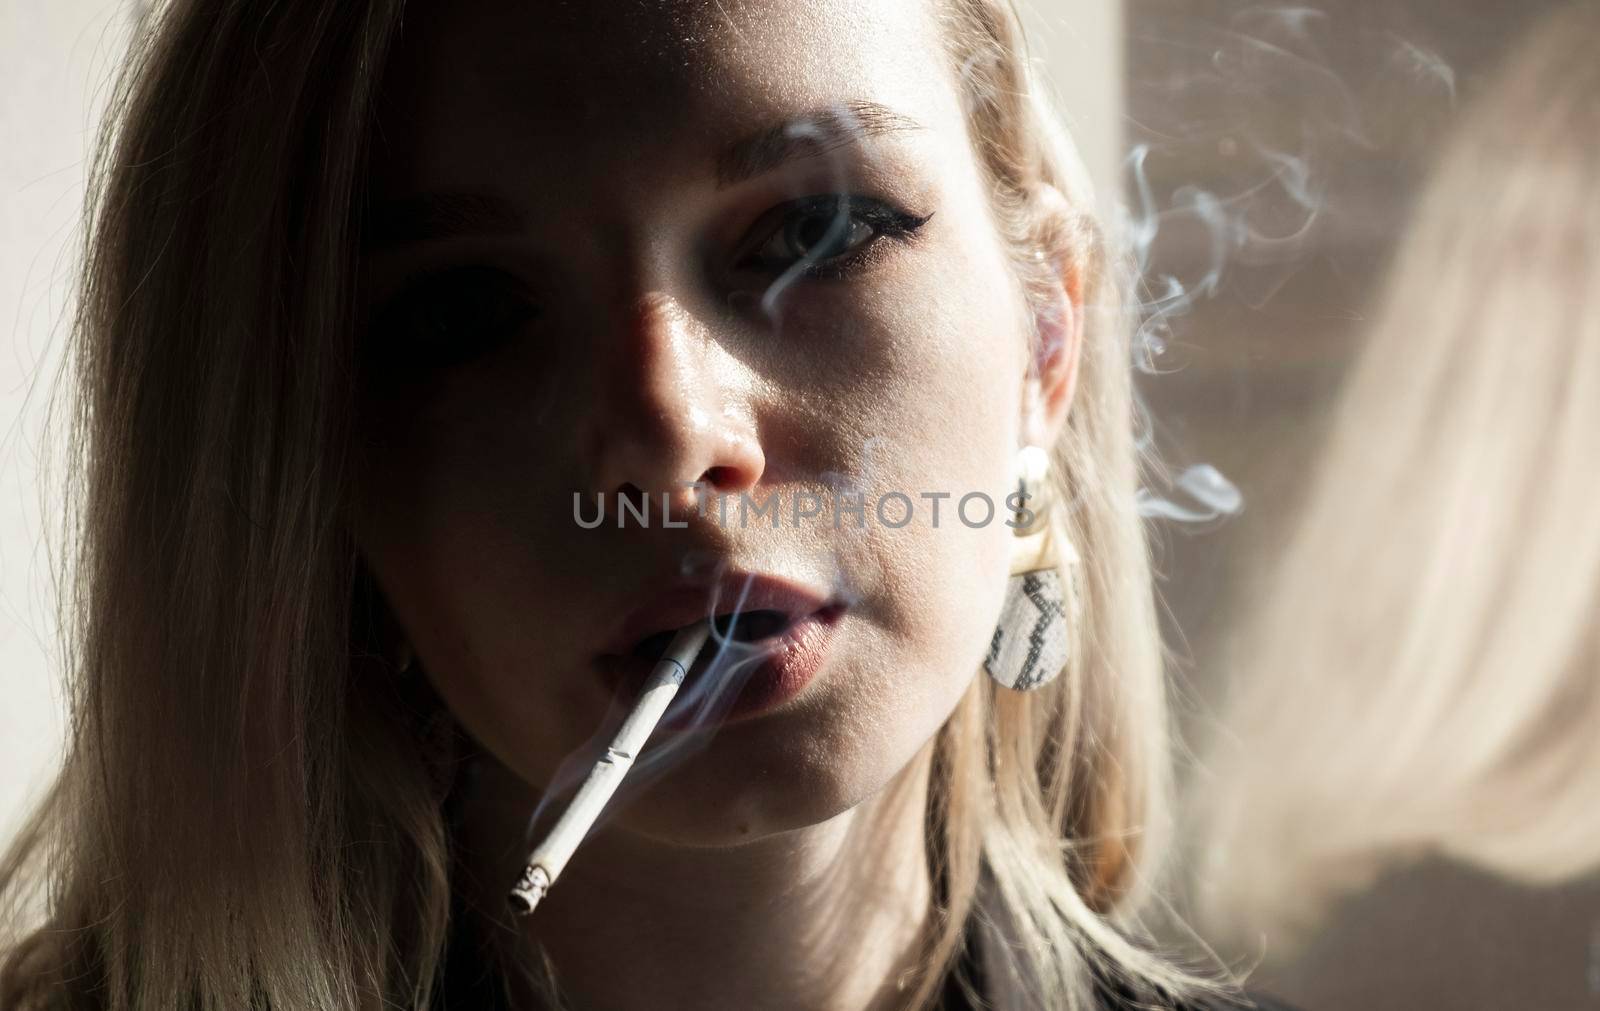 Close-Up Of Young Woman Smoking Cigarette By Window